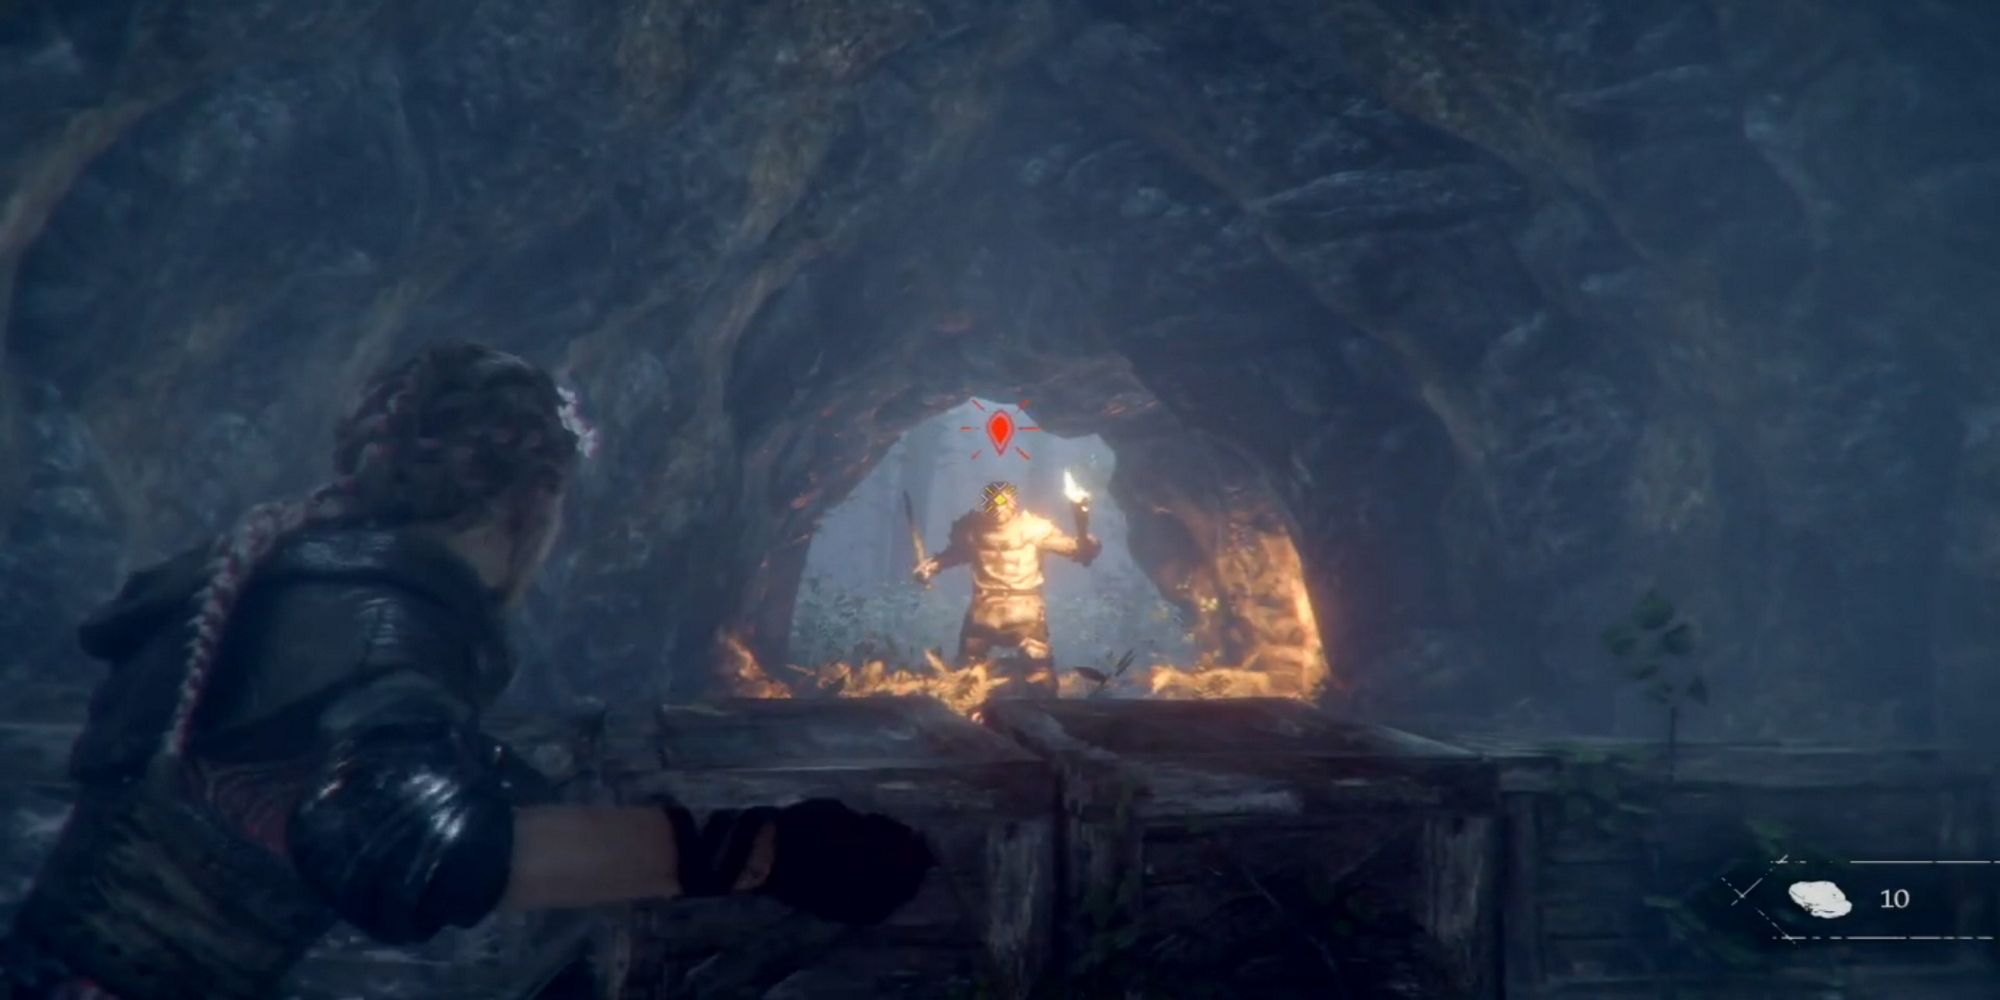  Devorantis Sling Projectile from A Plague Tale Innocence being used against a helmeted enemy